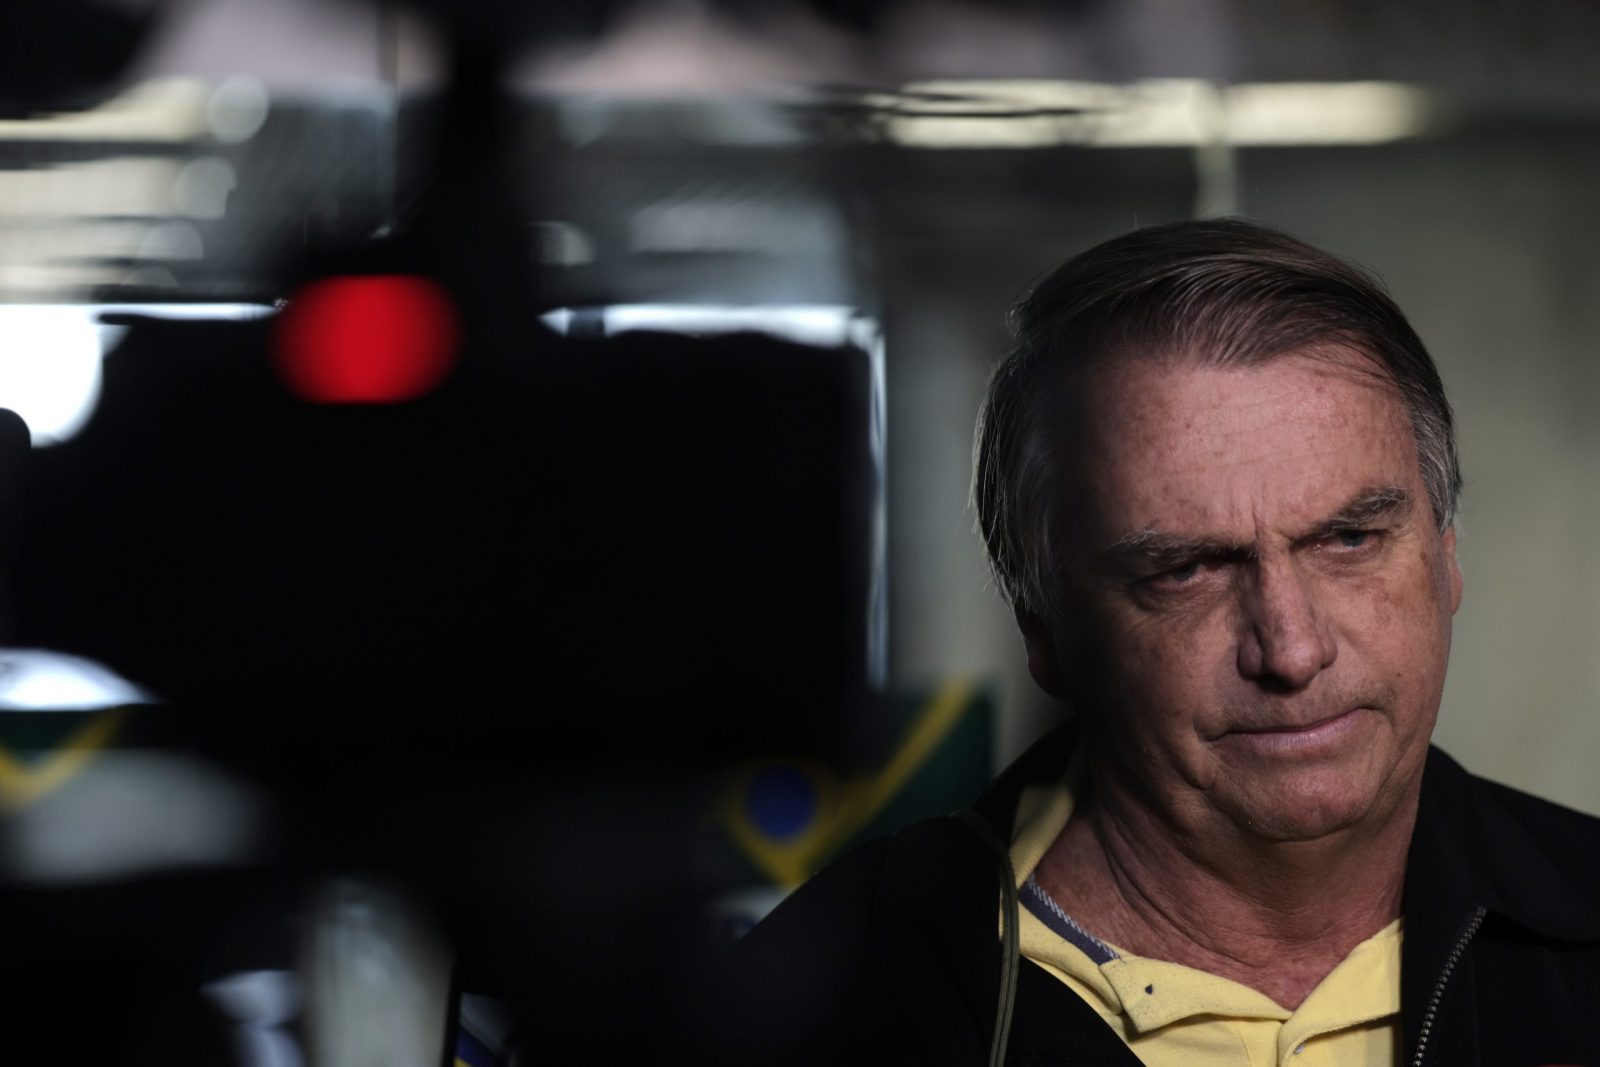 epa10717569 The former president of Brazil, Jair Bolsonaro, arrives at Santos Dumont airport, in Rio de Janeiro, Brazil 29 June 2023. The Superior Electoral Tribunal (TSE) on 29 June resumed the trial against former Brazilian President Jair Bolsonaro for 'abuse of political power' in the 2022 elections, which could leave the ultra-right leader ineligible in Brazil until 2030.  EPA/Antonio Lacerda